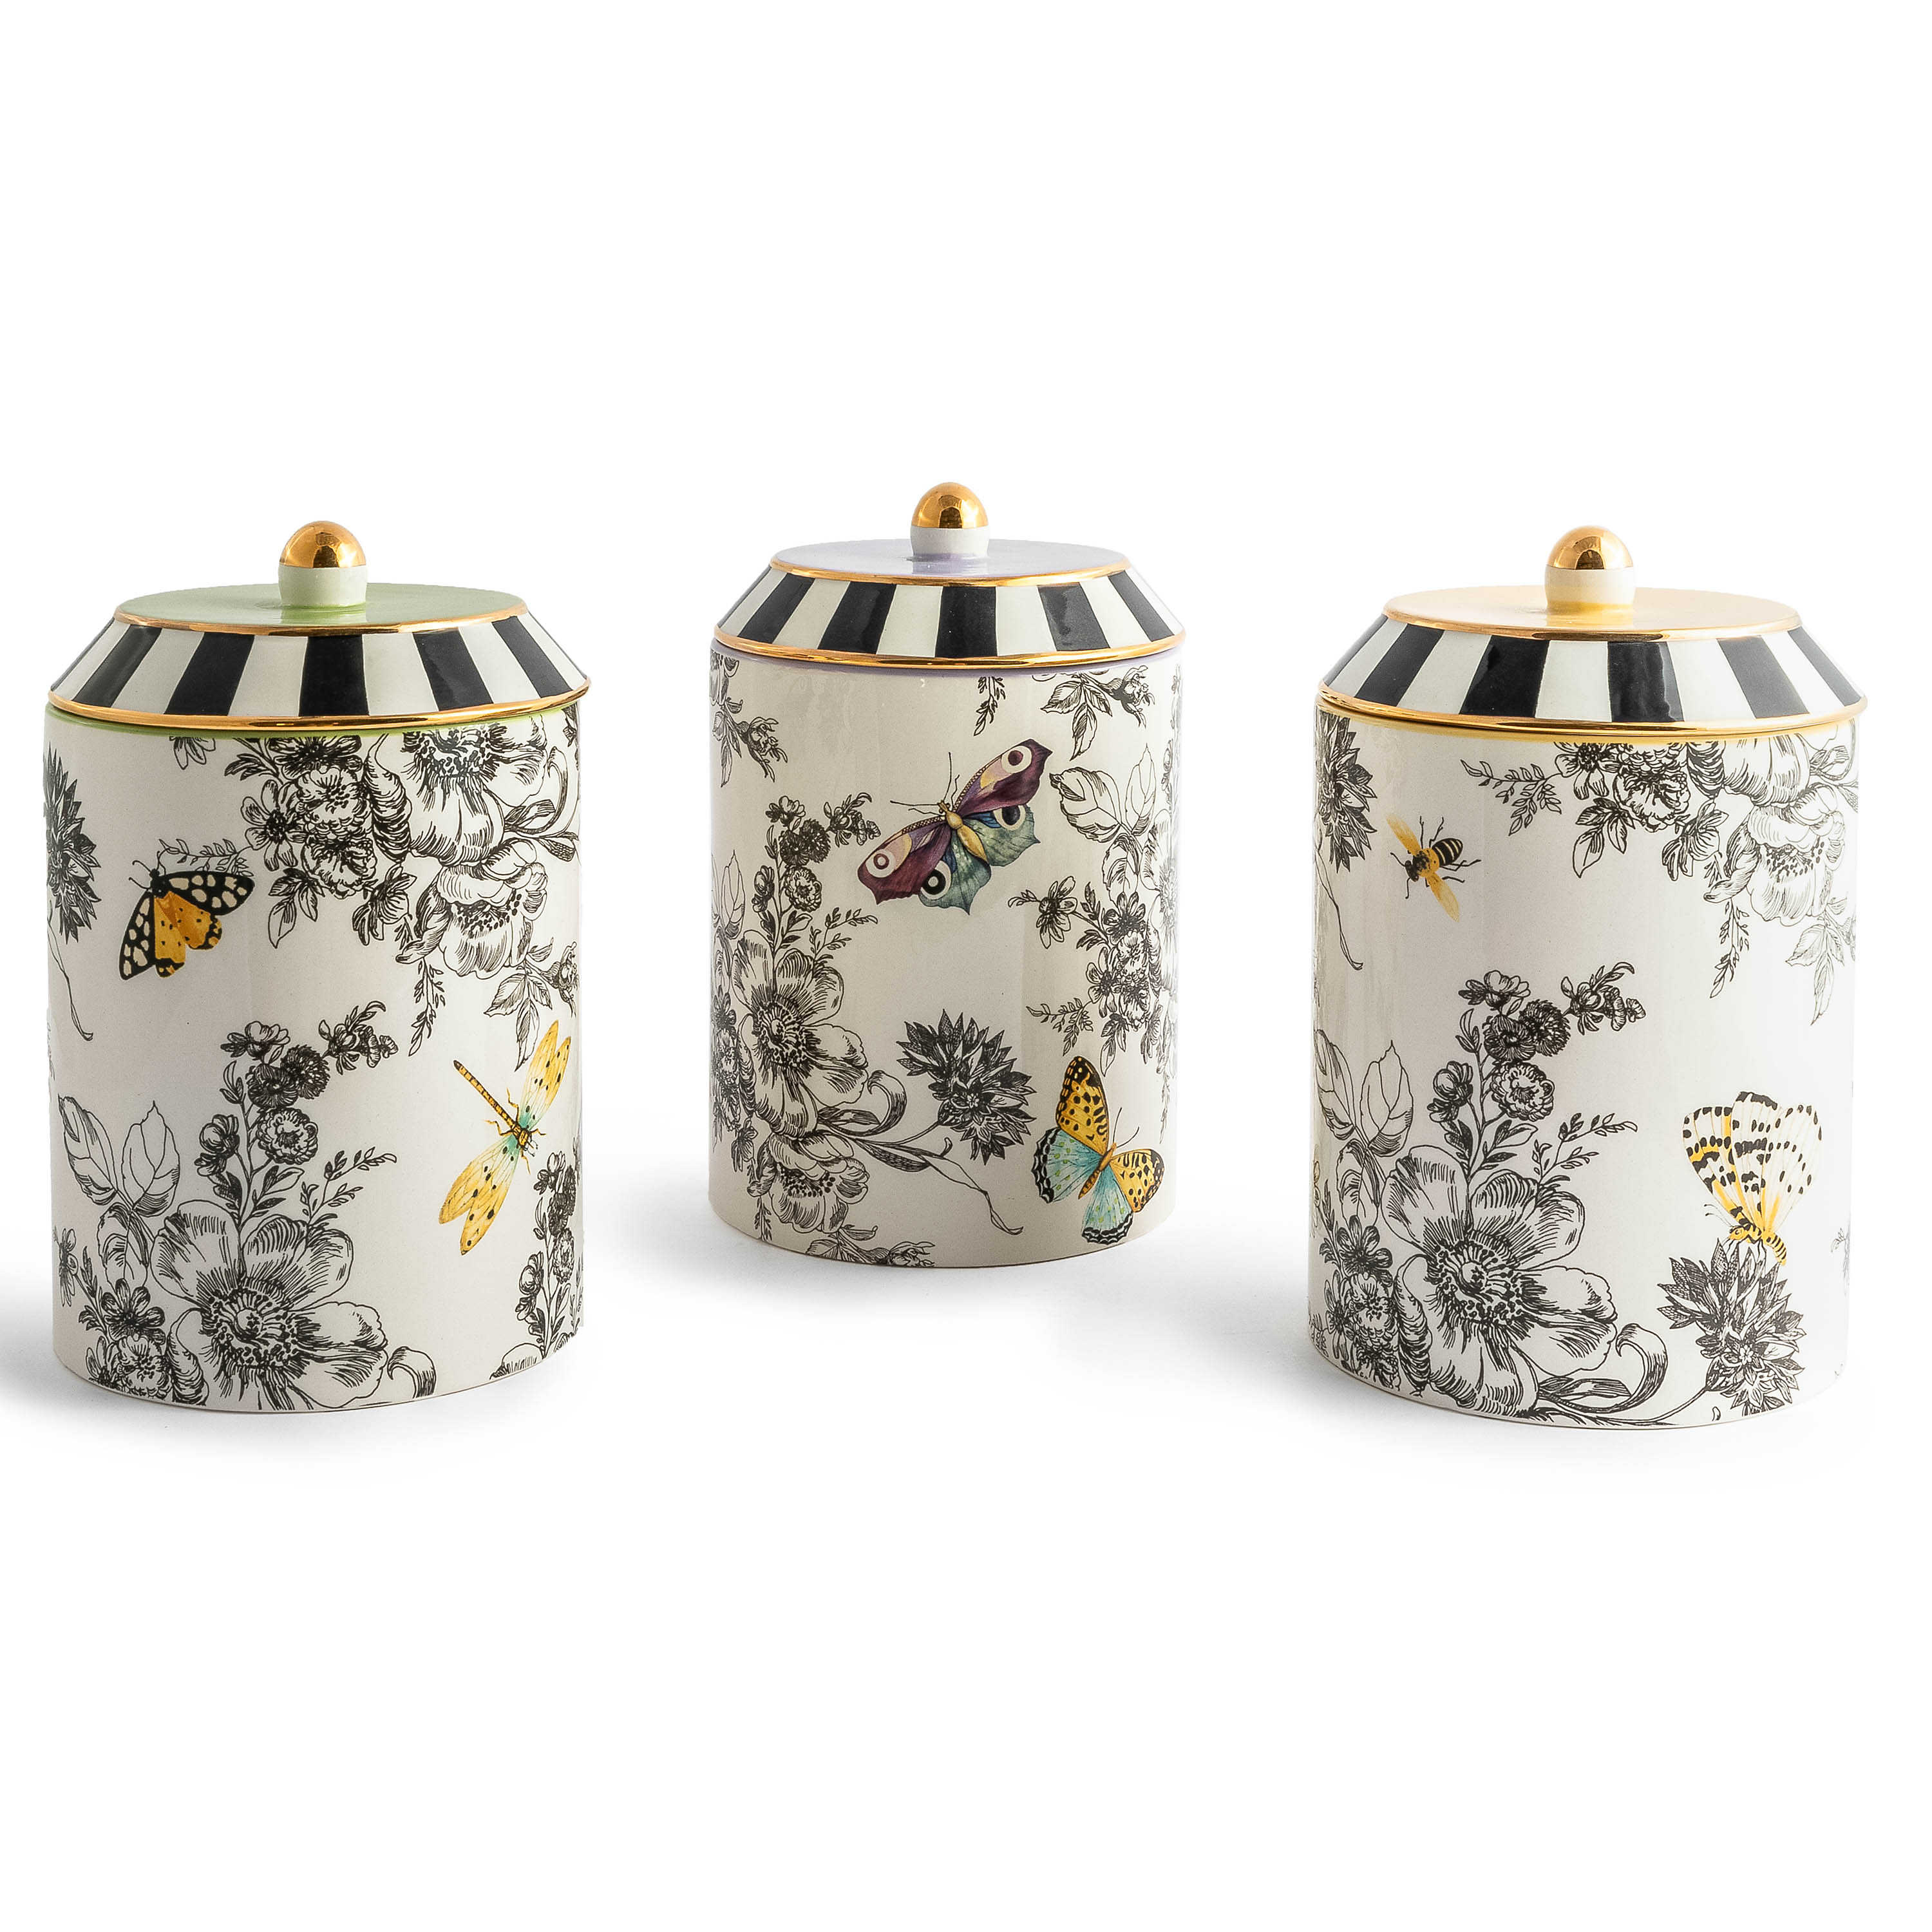 Butterfly Toile Canisters, Set of 3 mackenzie-childs Panama 0